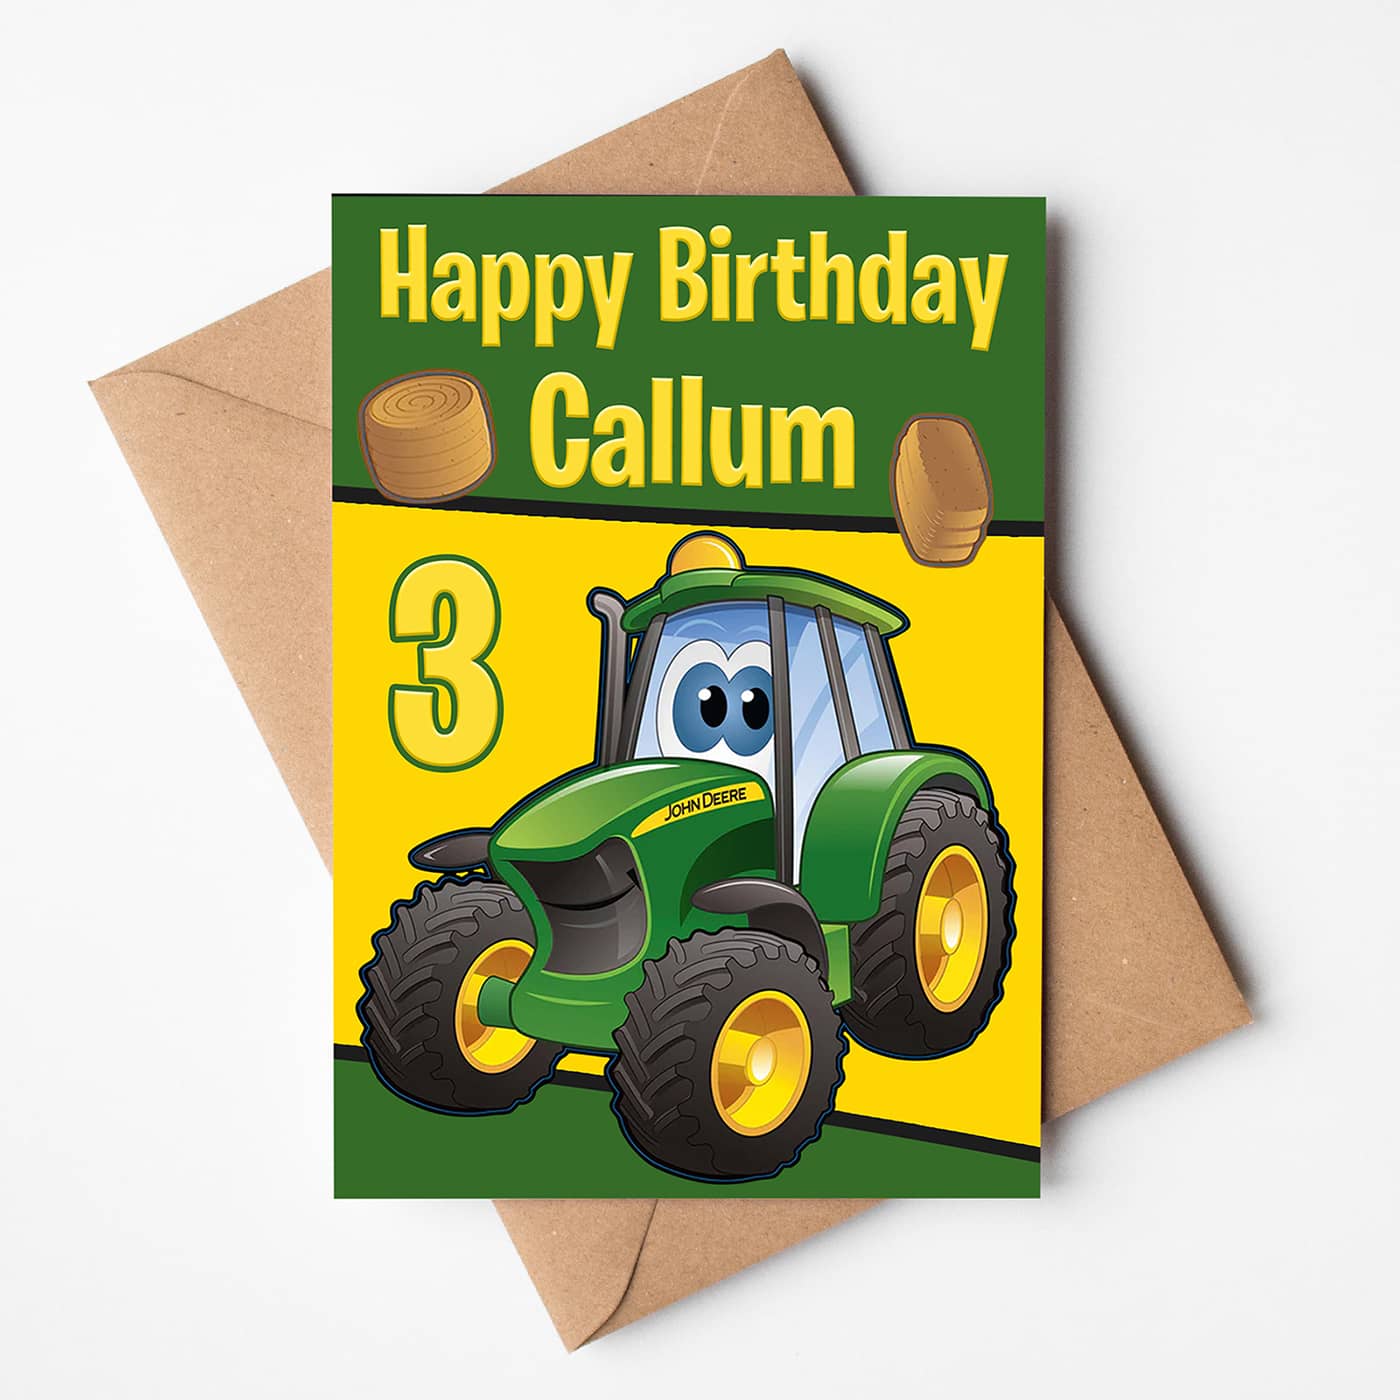 Colourful birthday card featuring the John Deere tractor "Johnny Tractor"